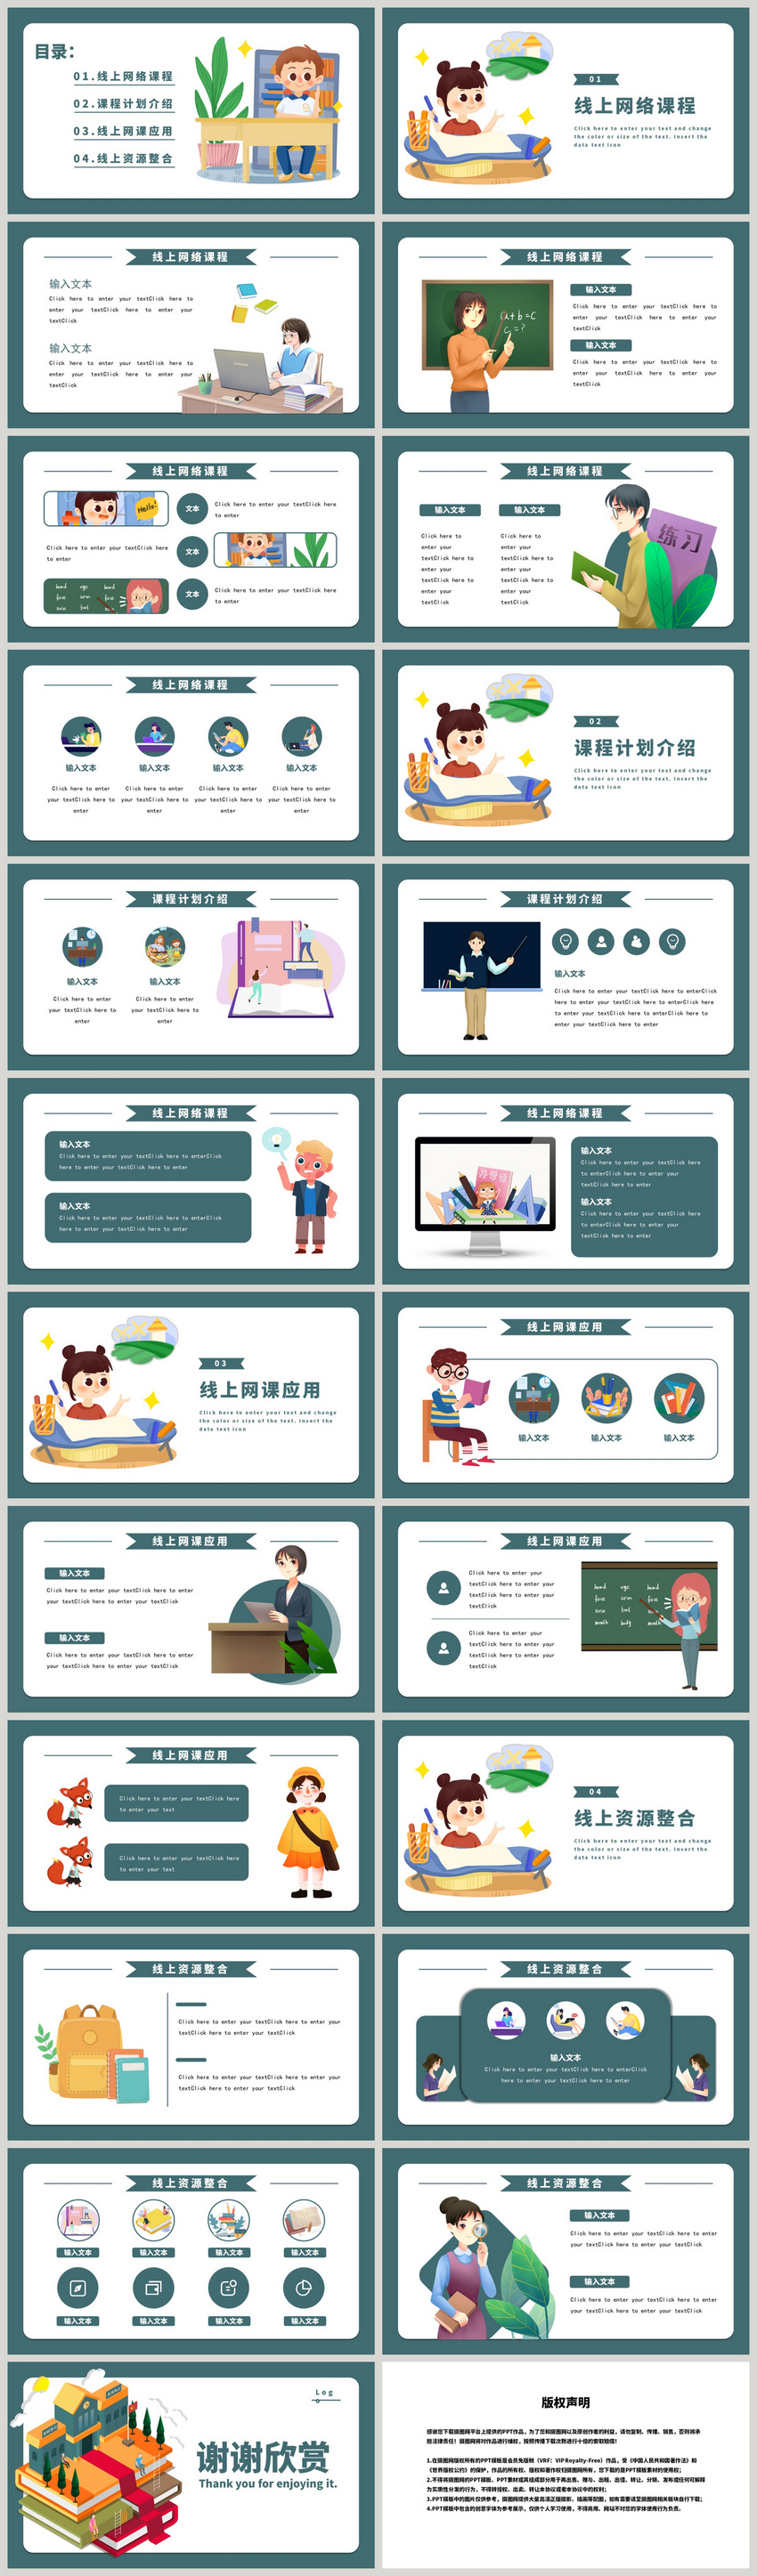 Green Cartoon Online E Learning Education Ppt Template Powerpoint